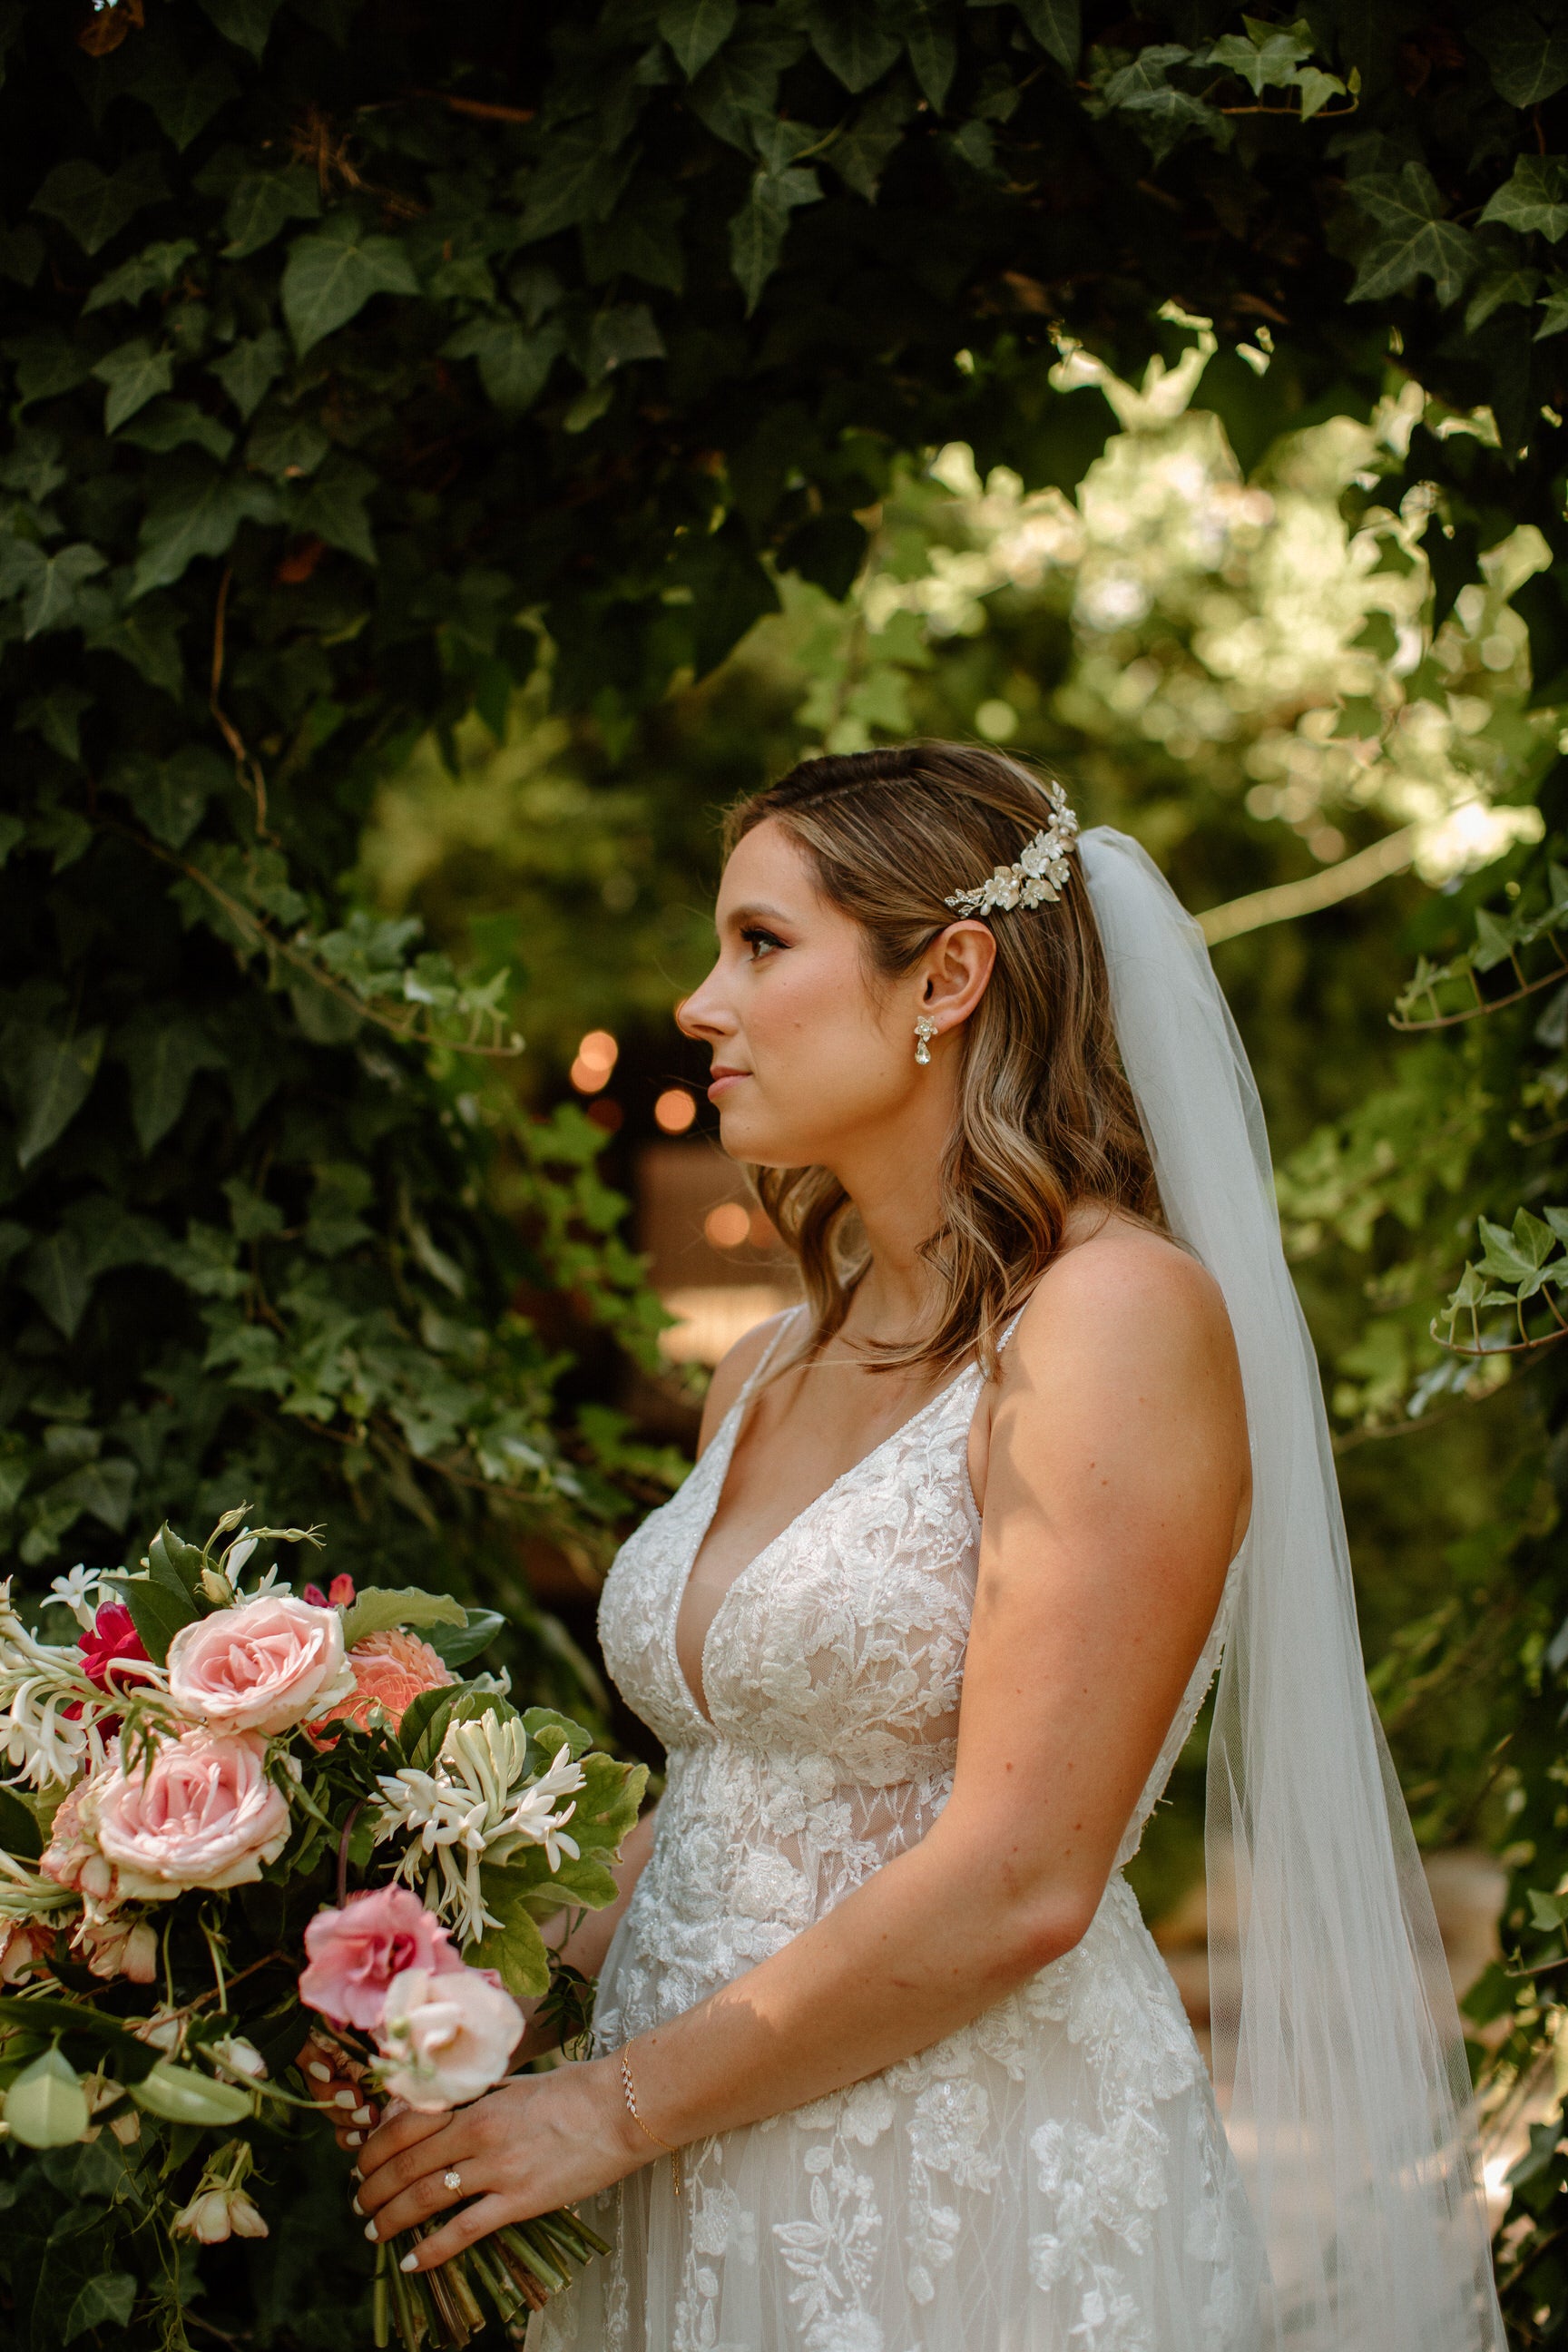 Tulle Veil  Wedding Dresses, Veils, and Capes - Grace + Ivory